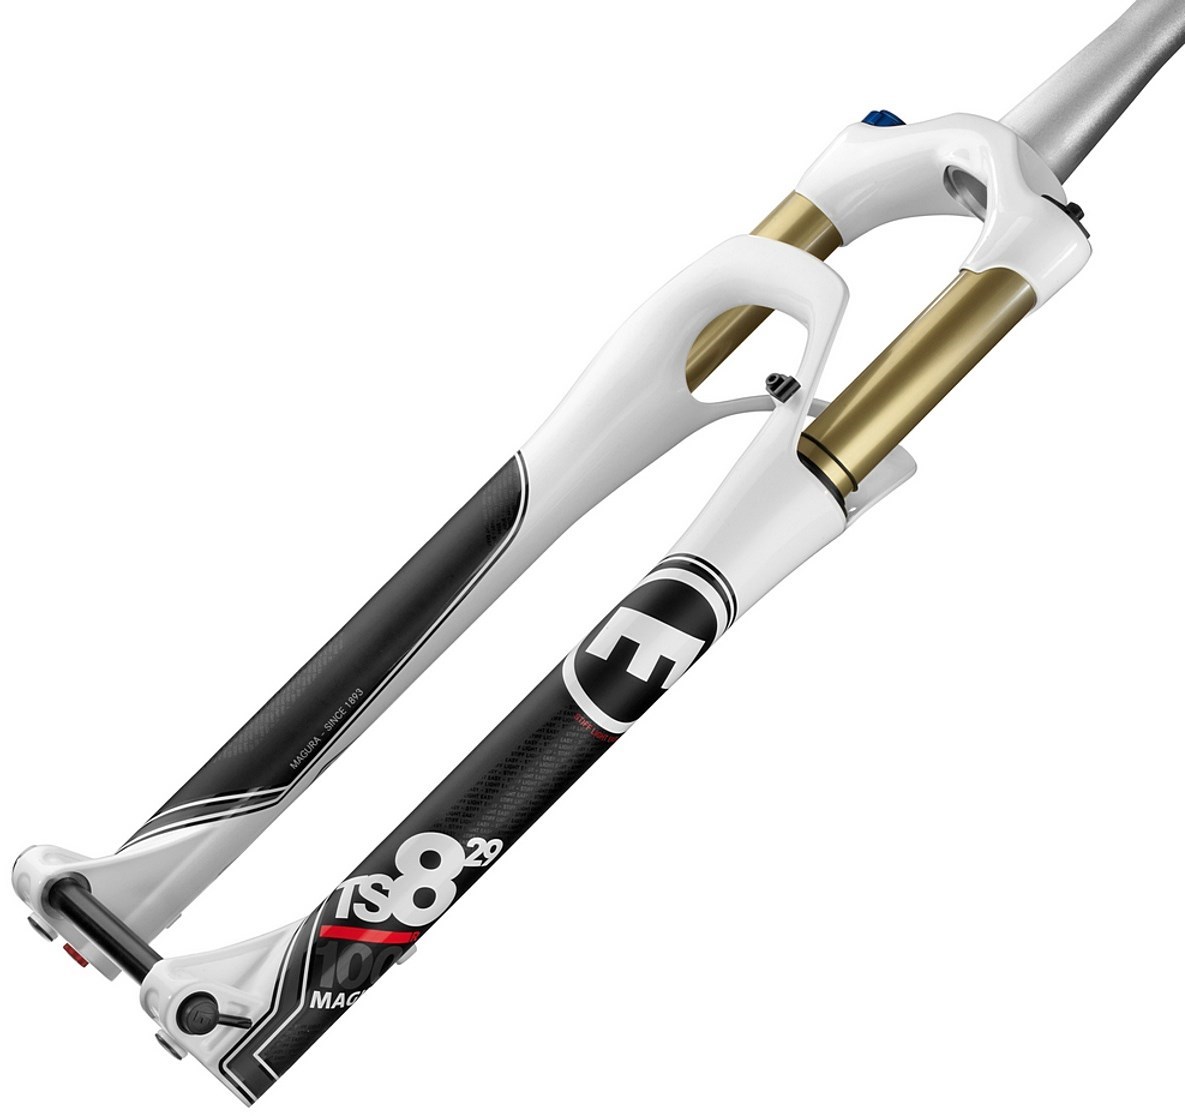 Magura TS8 R 120 29er 29 inch Suspension Fork 2013 product image